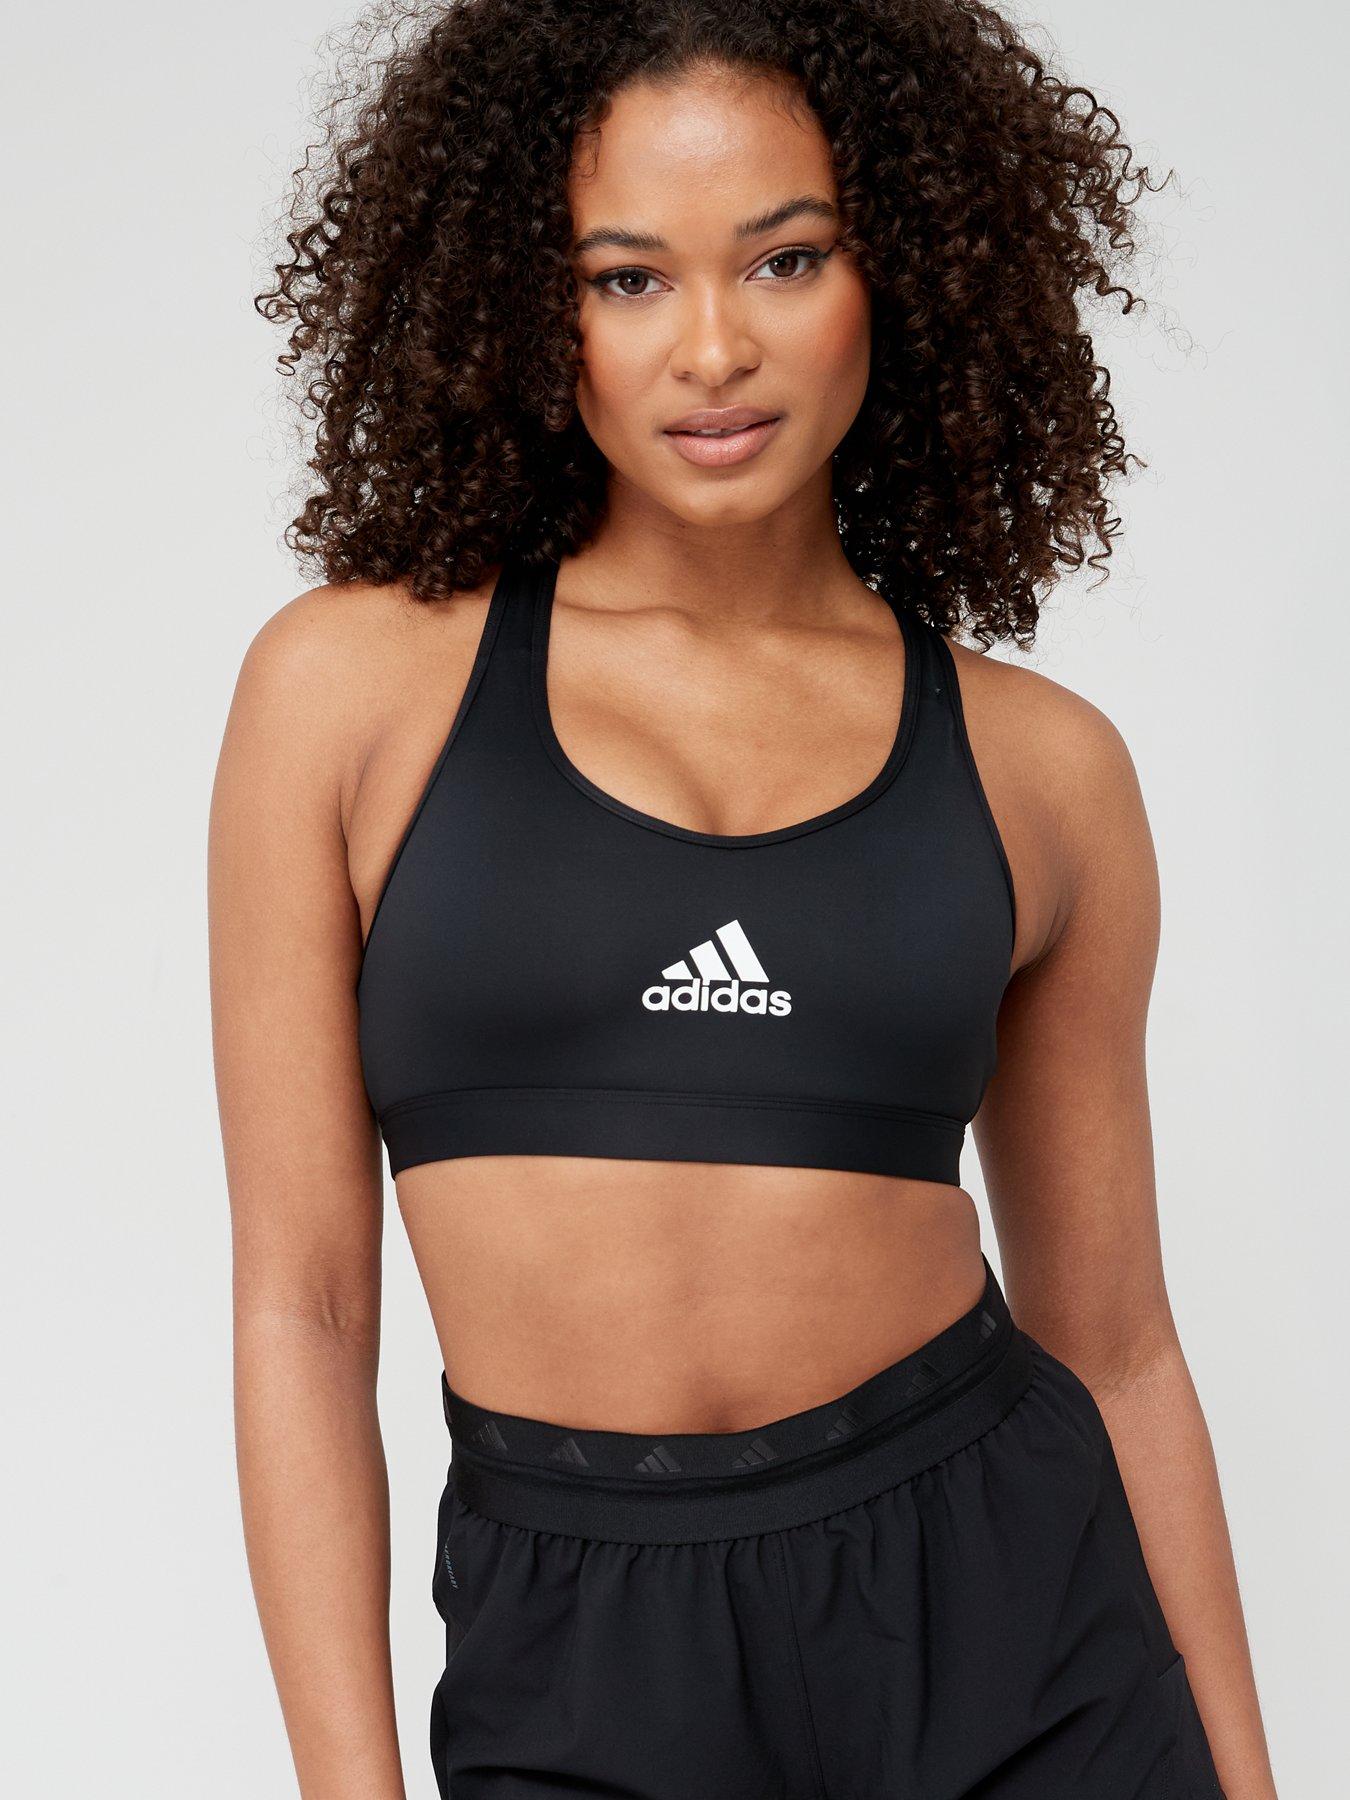 adidas Womens TLRD Move Training High-Support Bra (Plus Size) Black 3X